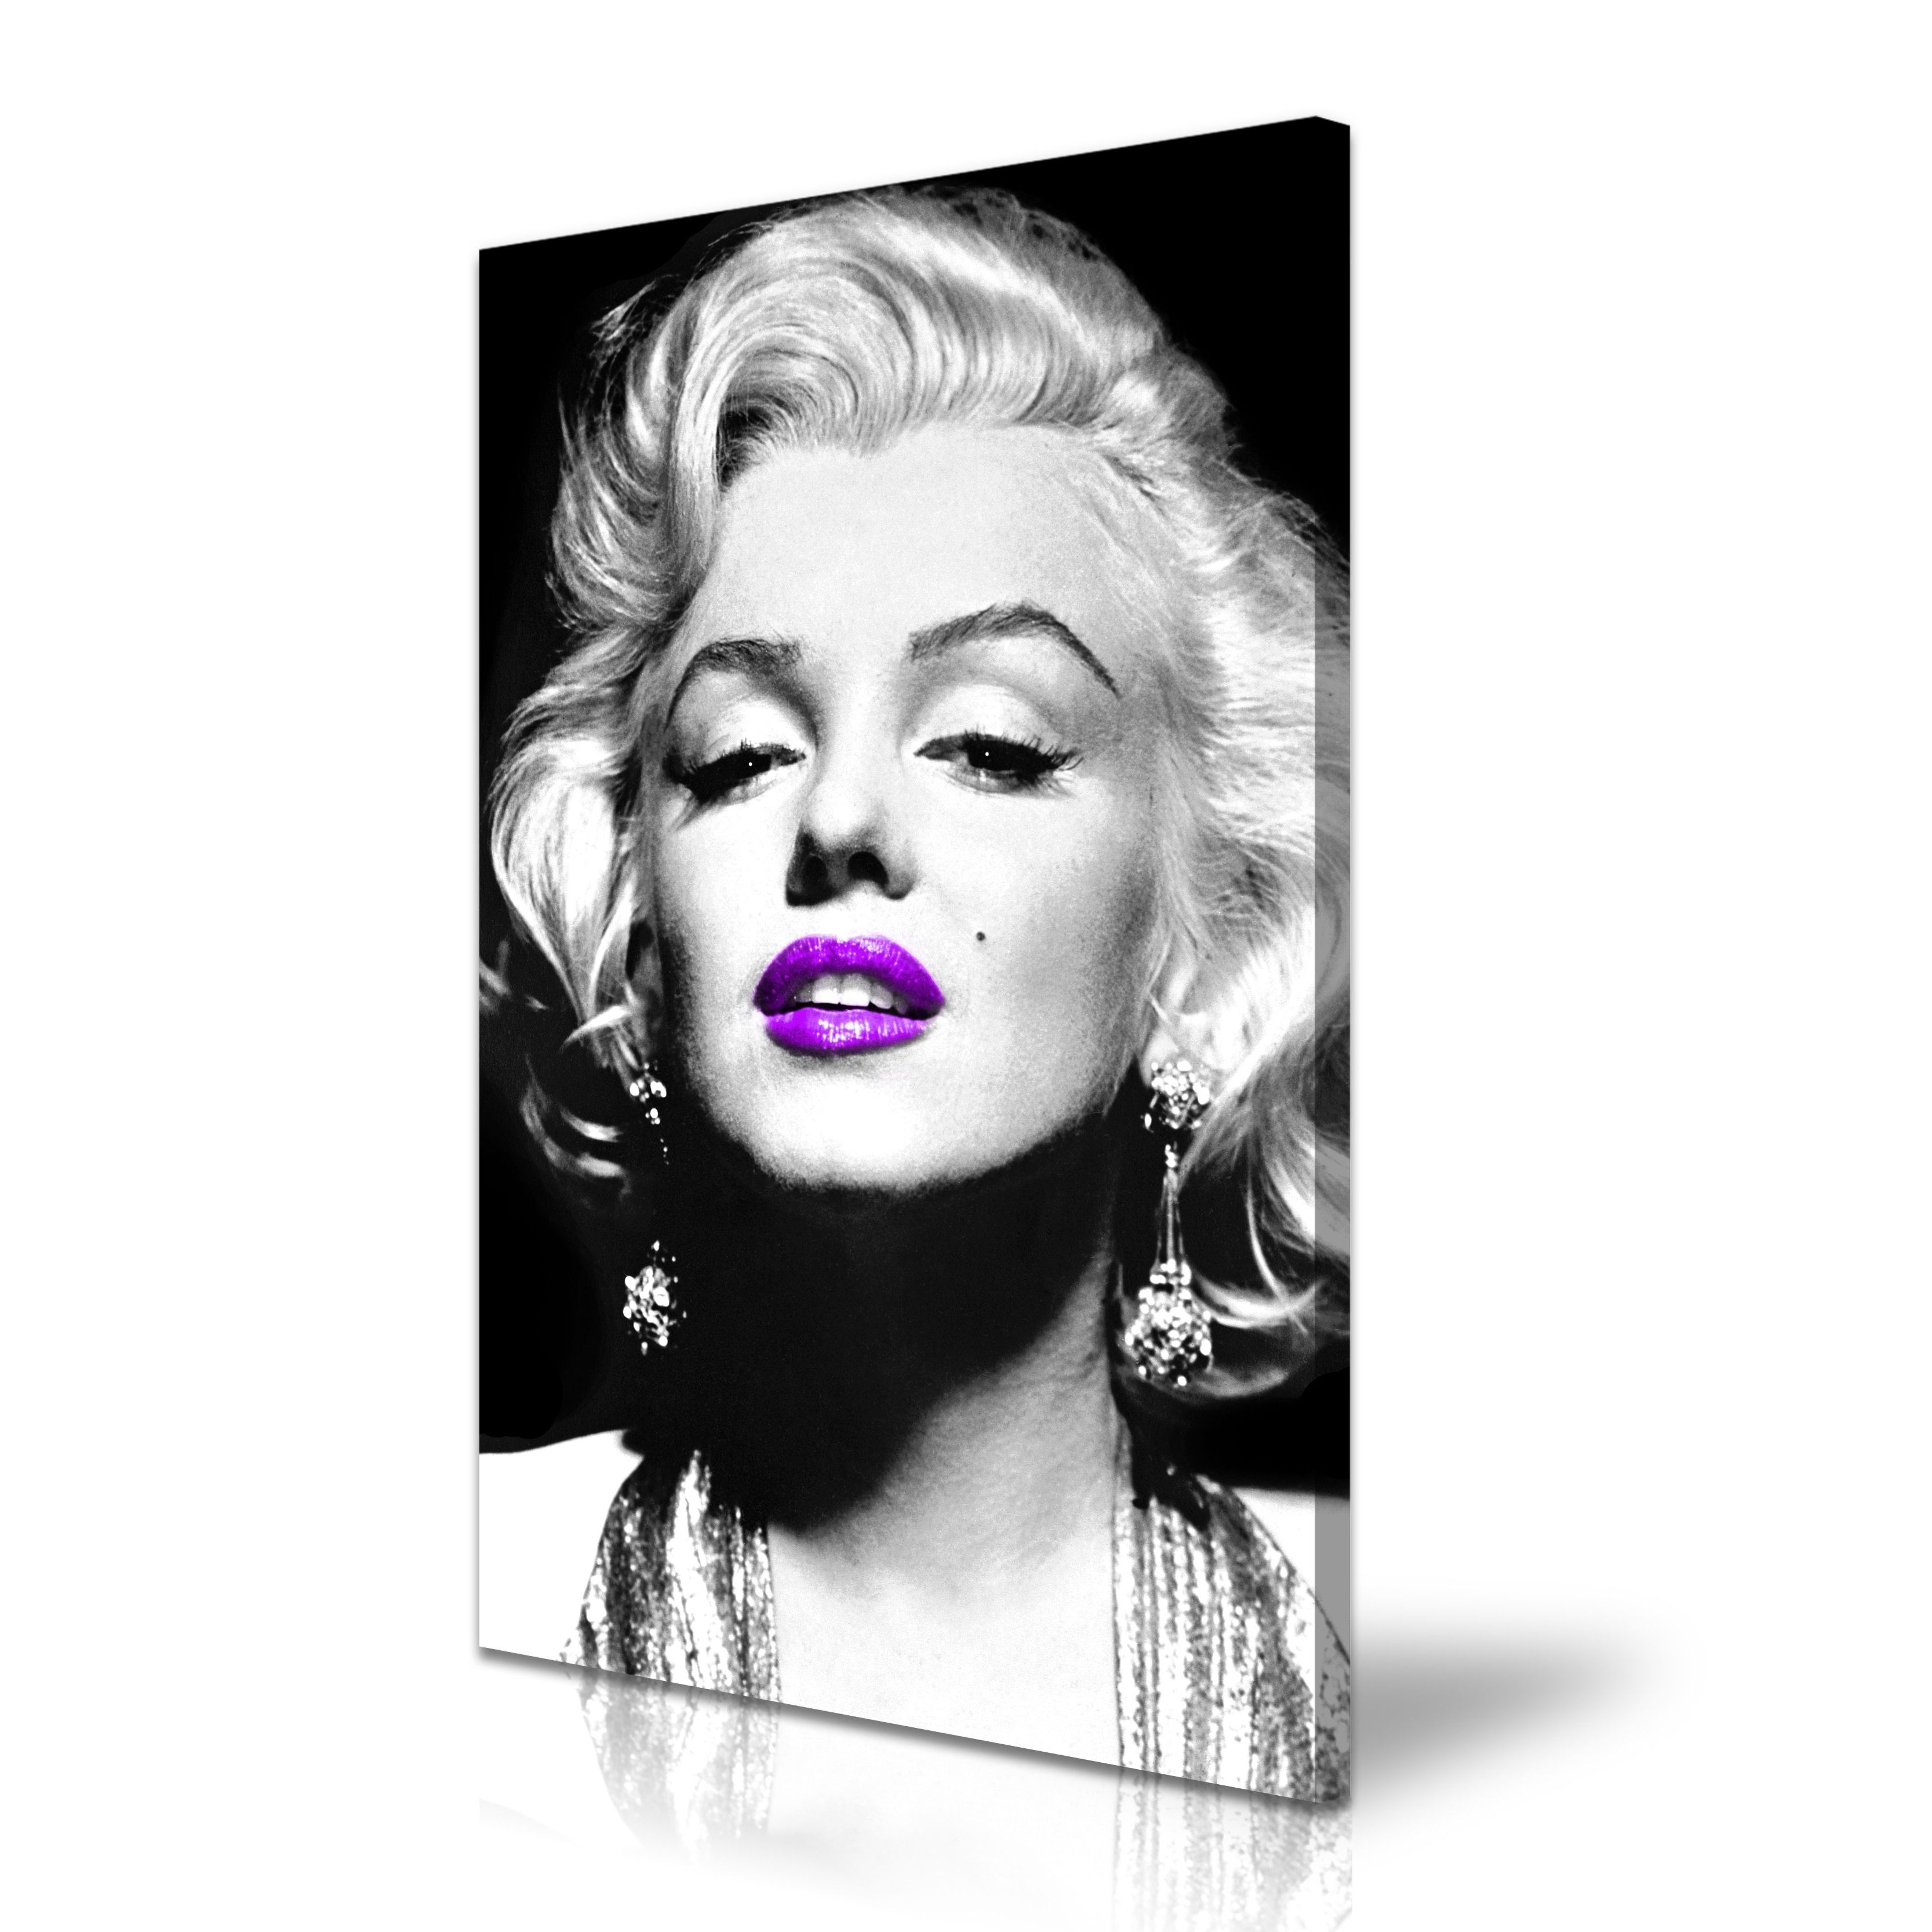 Marilyn Monroe Framed Wall Art Intended For Trendy 15 Black And White Marilyn Monroe Framed Pictures Selection (View 12 of 15)